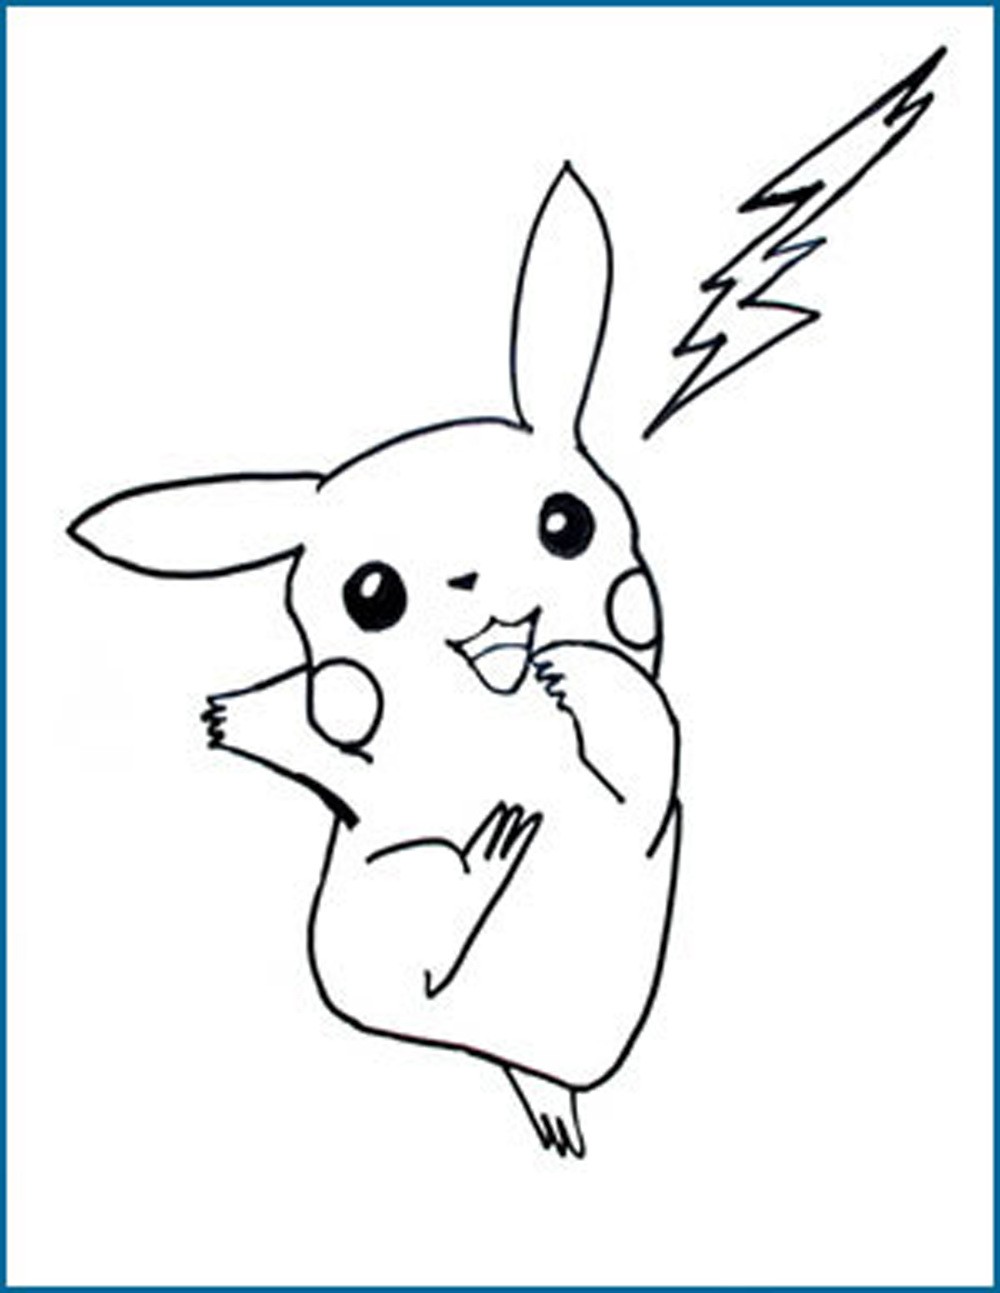 Pokemon Card Coloring Pages